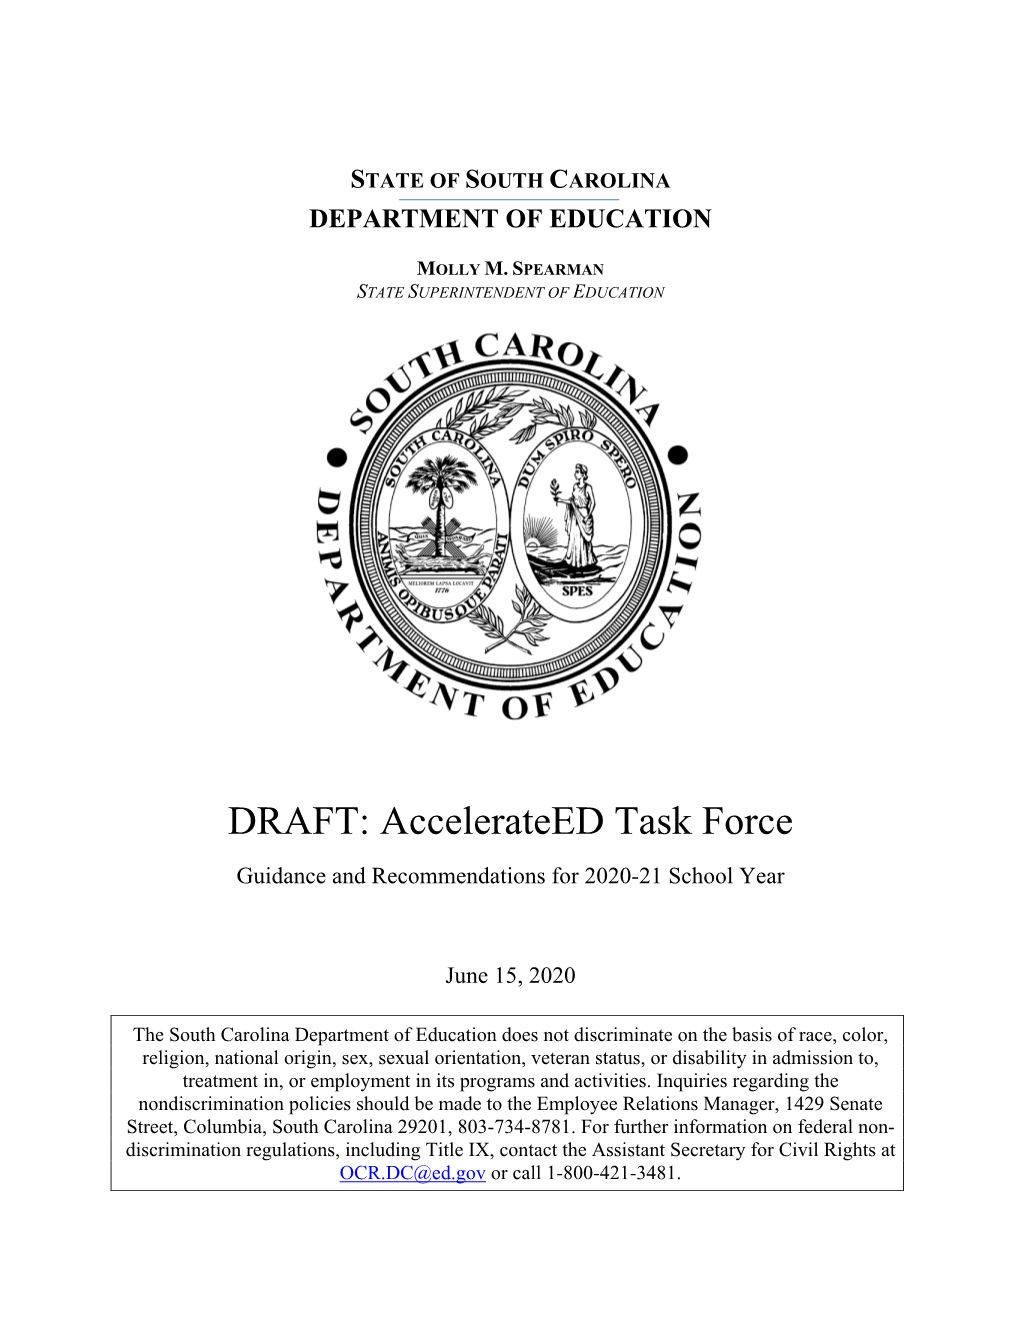 DRAFT: Accelerateed Task Force Guidance and Recommendations for 2020-21 School Year